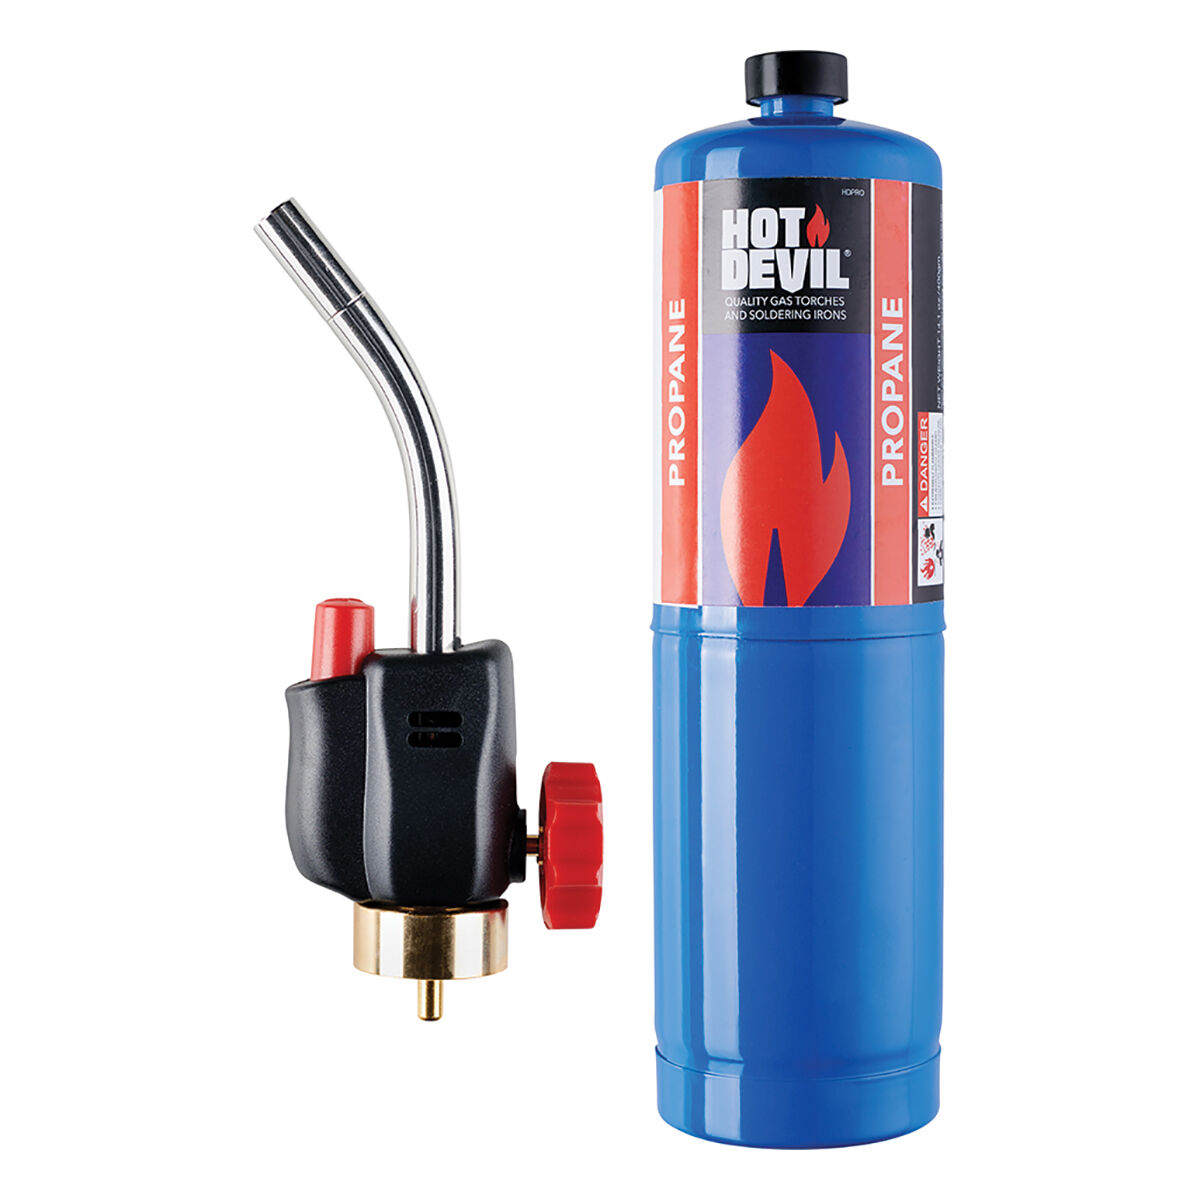 Fuel "For Disposable Cans" MAPP/PROPANE Regulator 